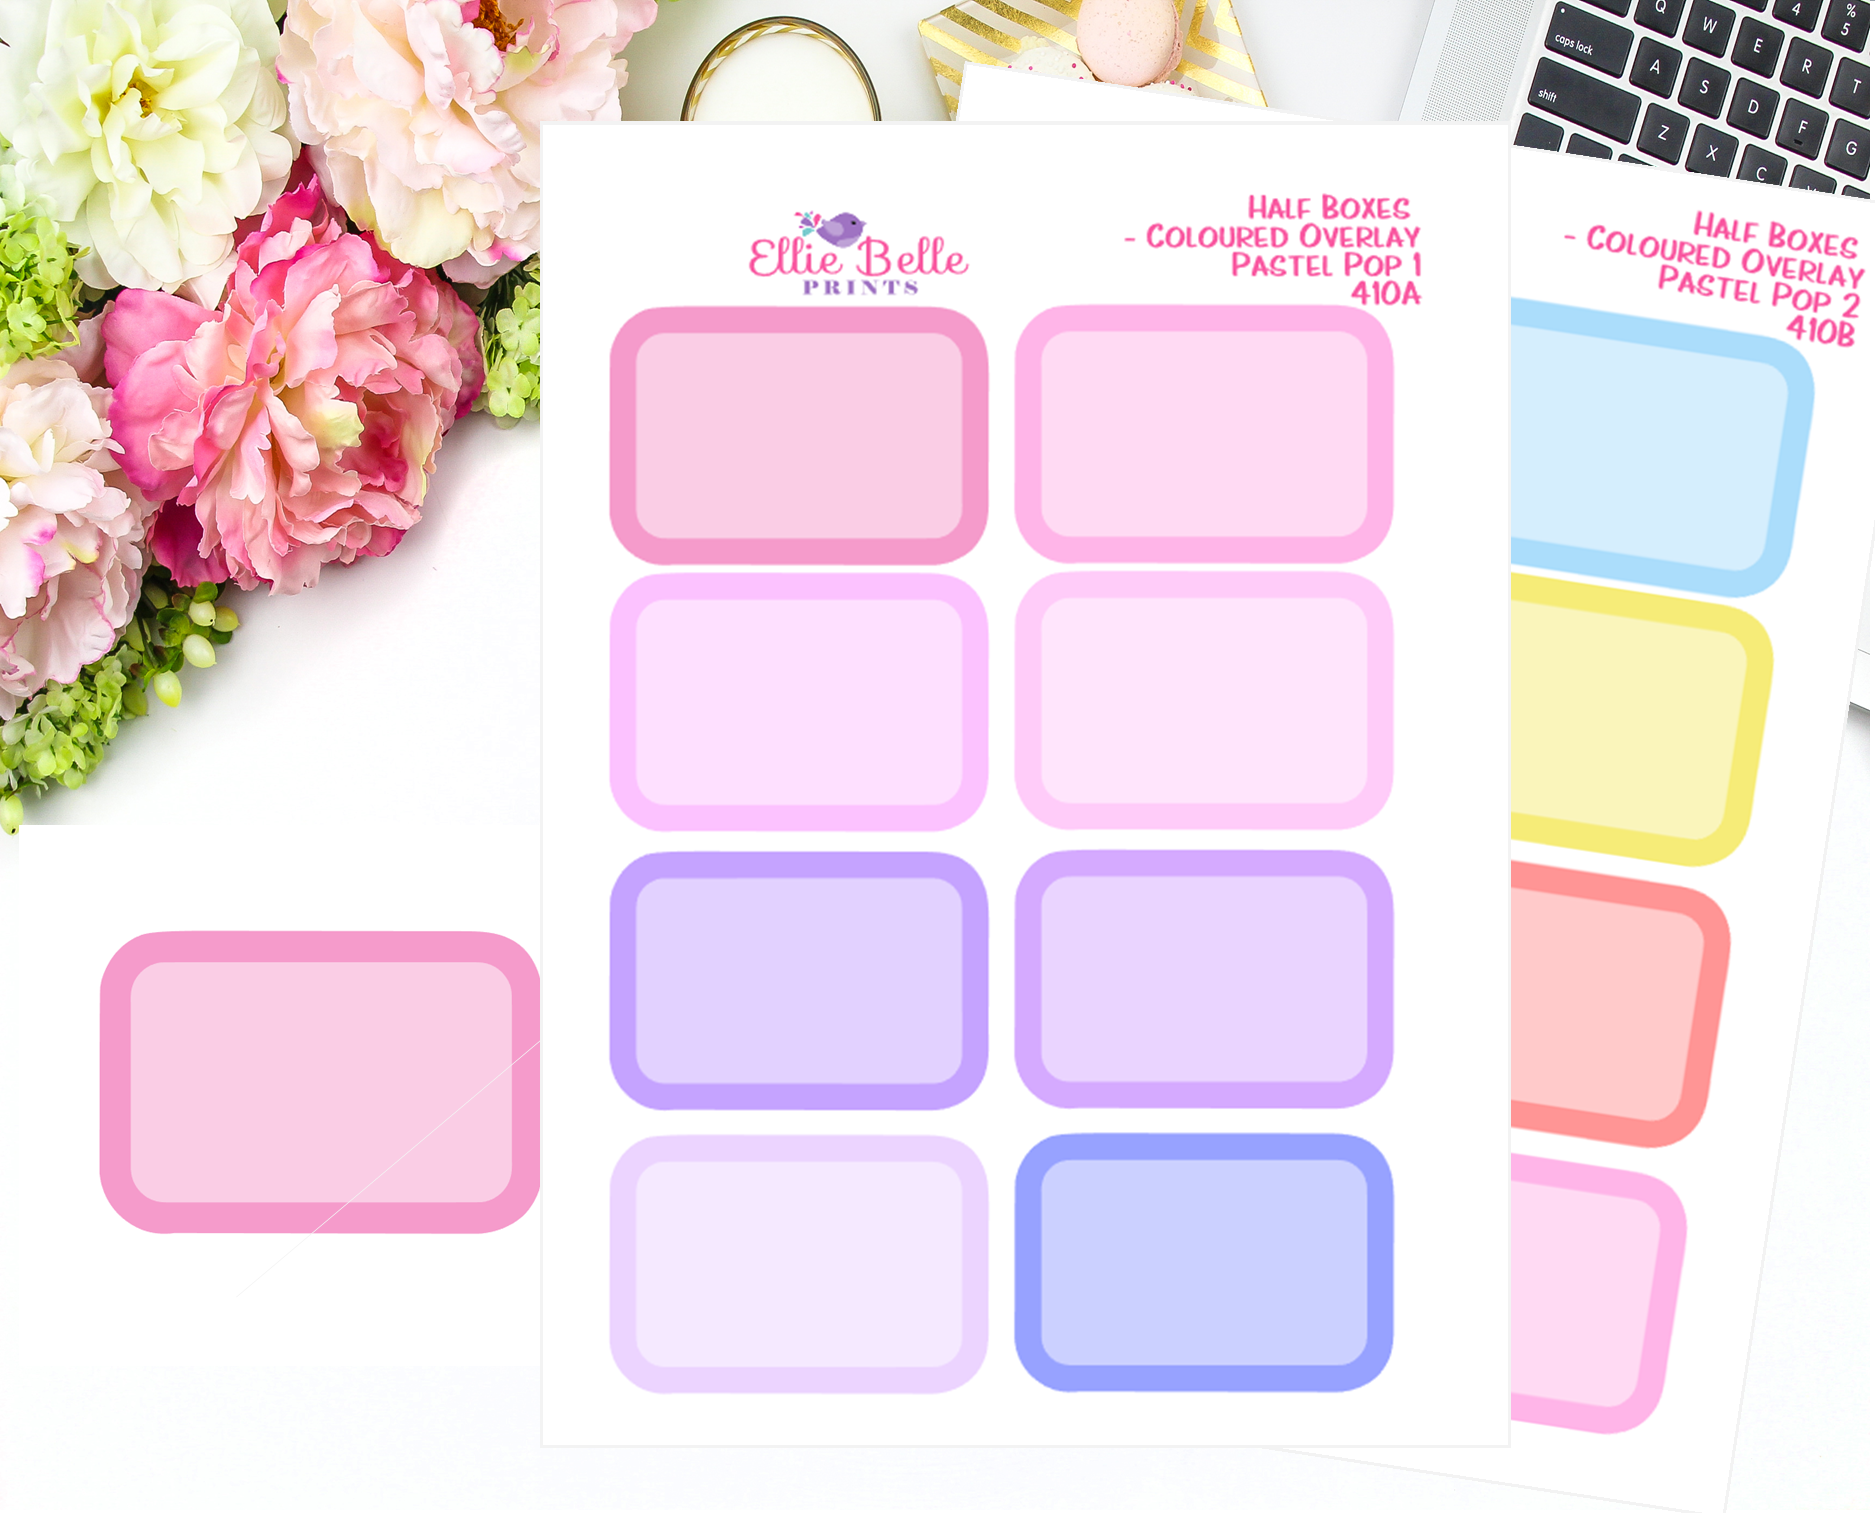 Half Box With Coloured Overlay Stickers - Pastel Pop